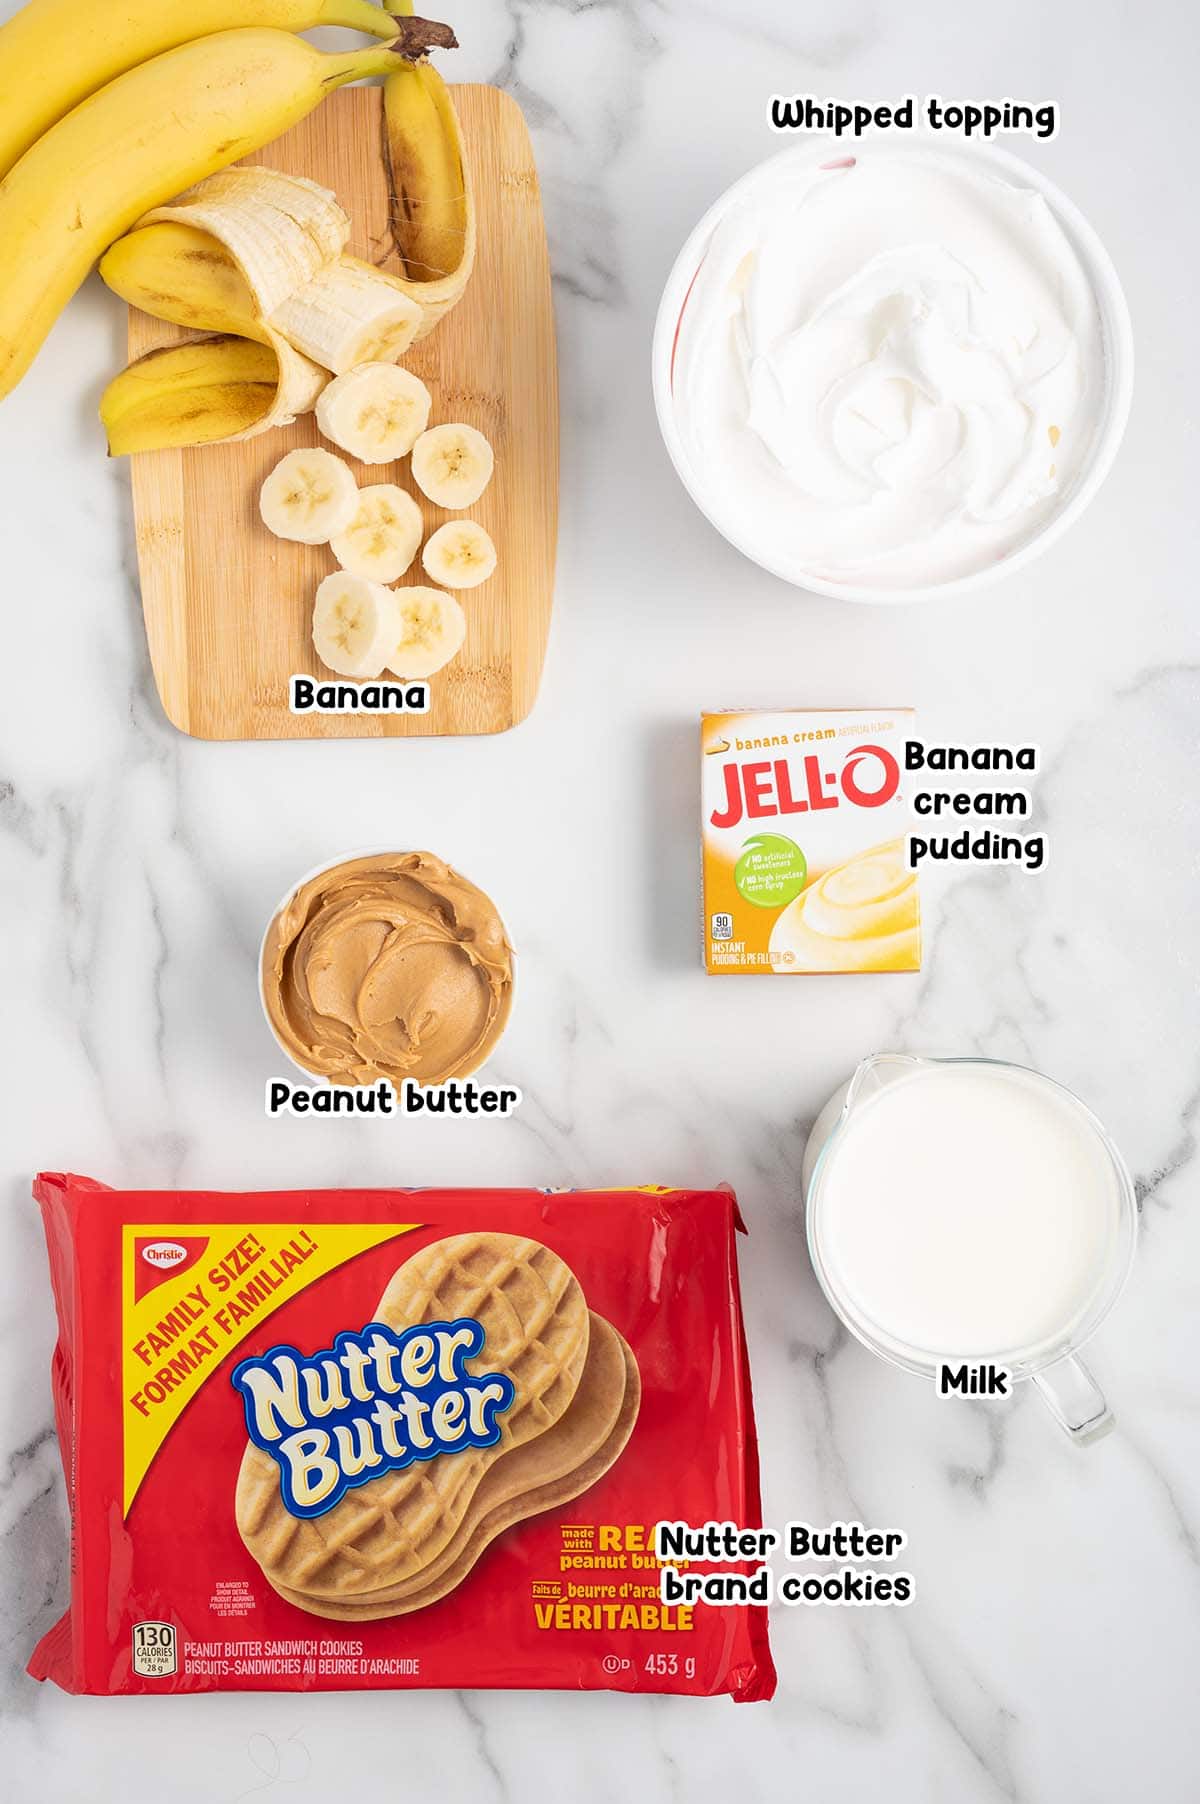 Nutter Butter Trifle ingredients.